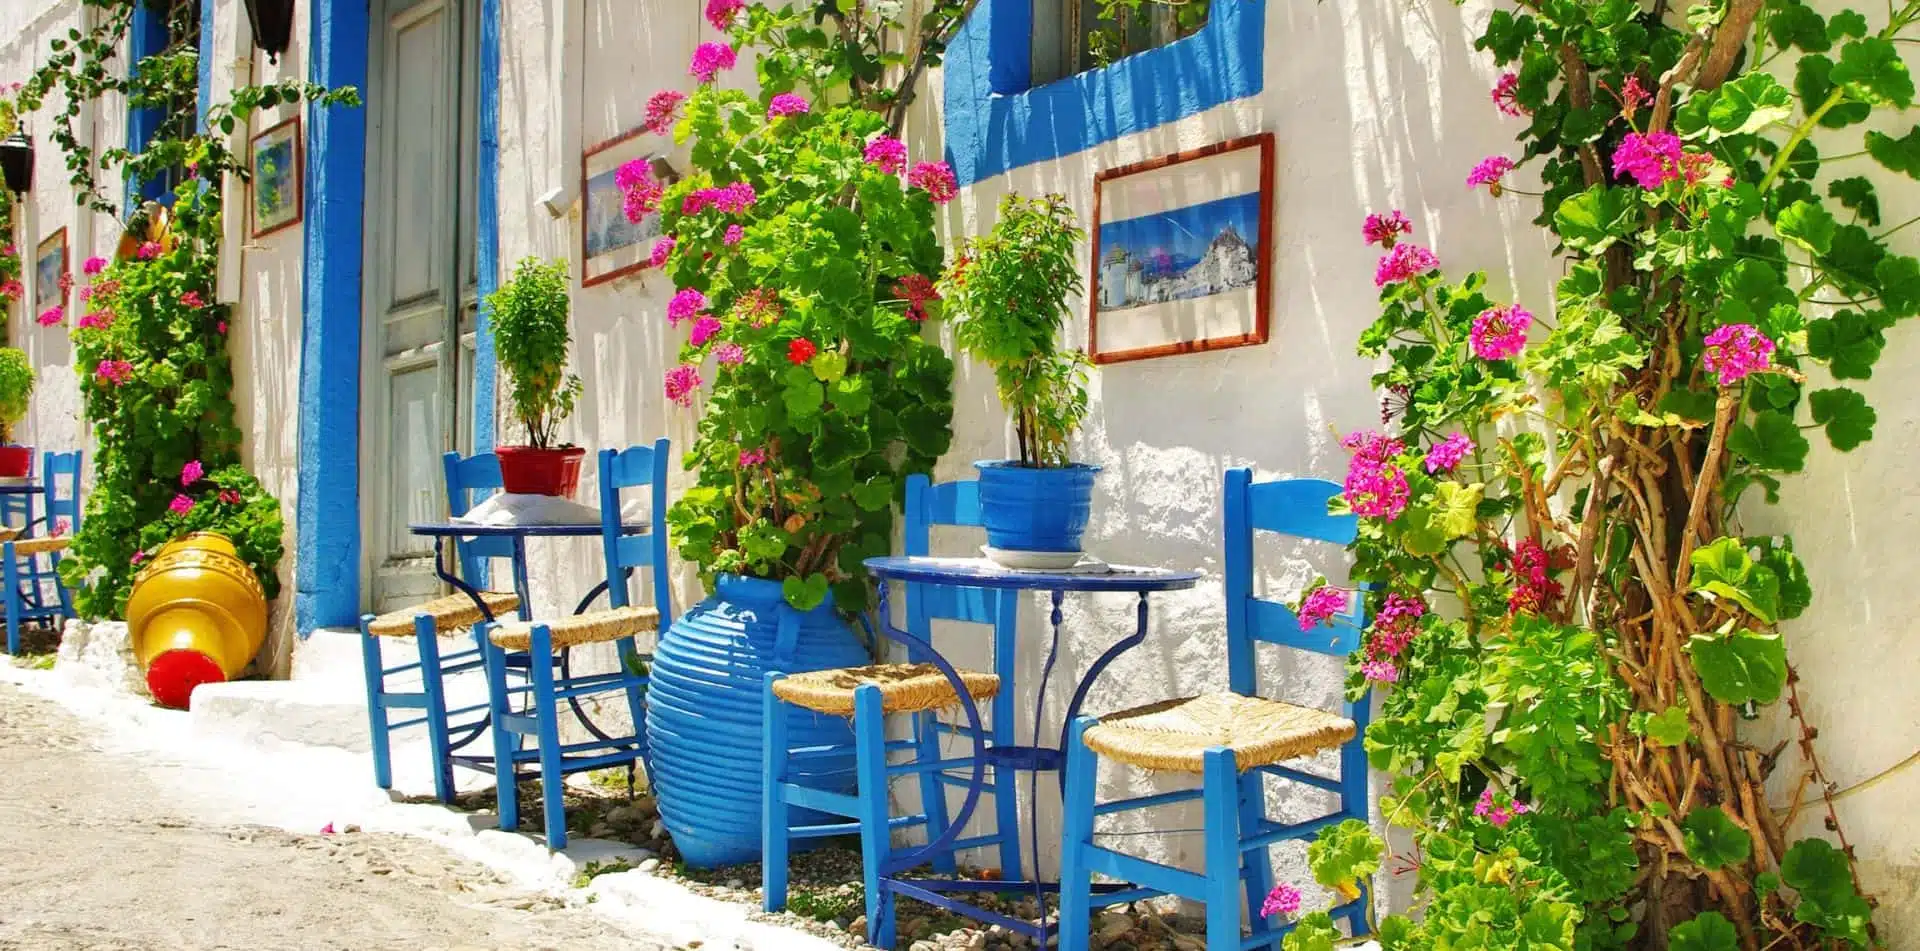 Soak in the culture while on tour in Greece